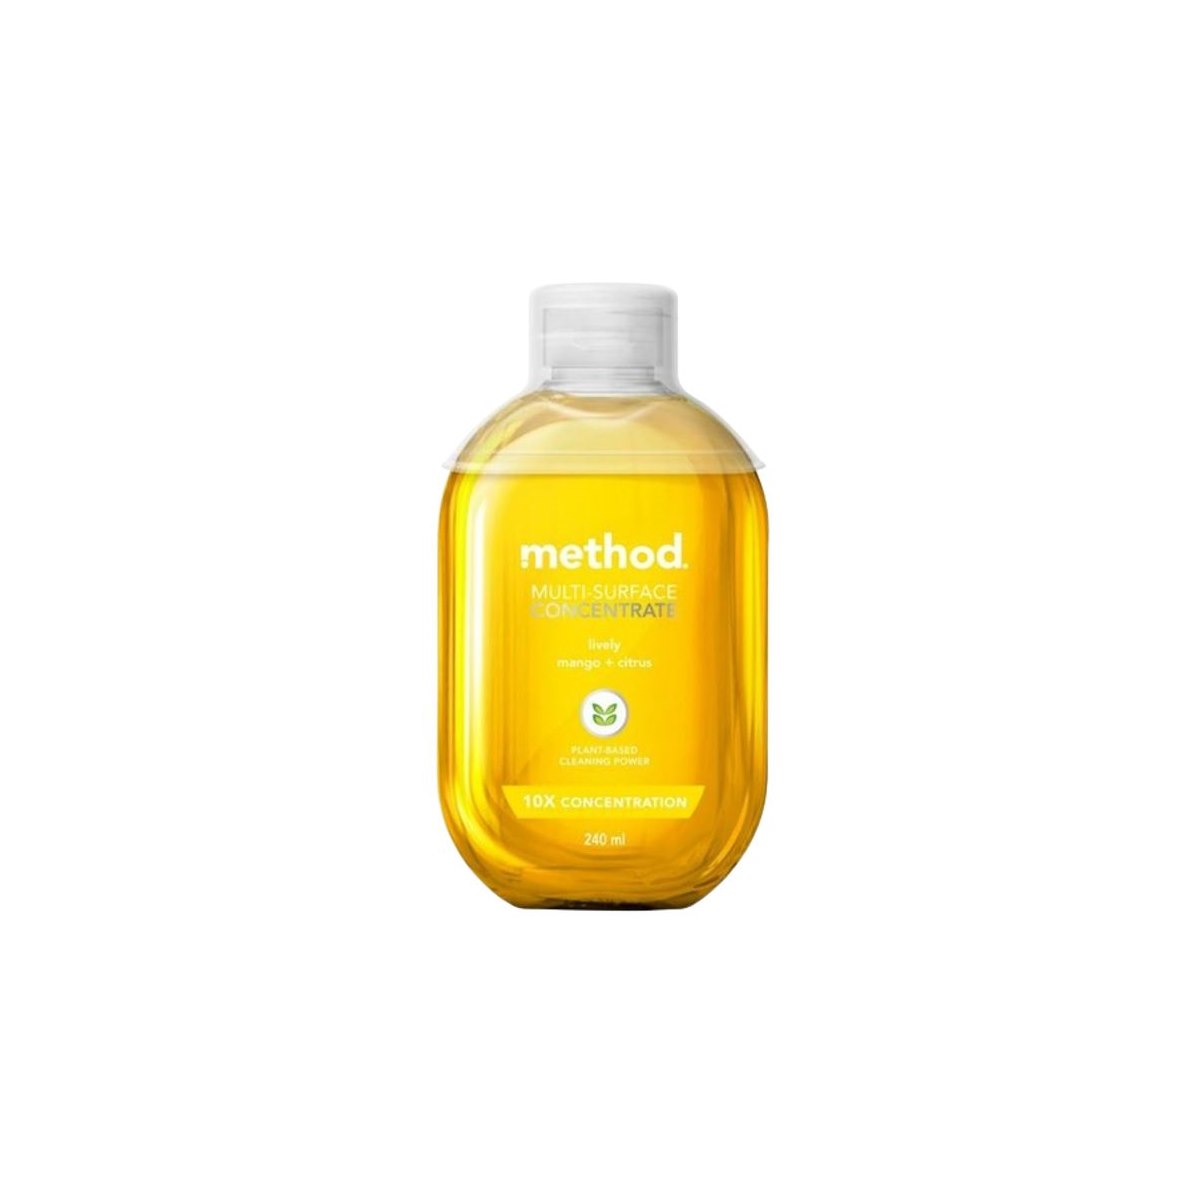 Method Multi Surface Concentrate Lively 240ml